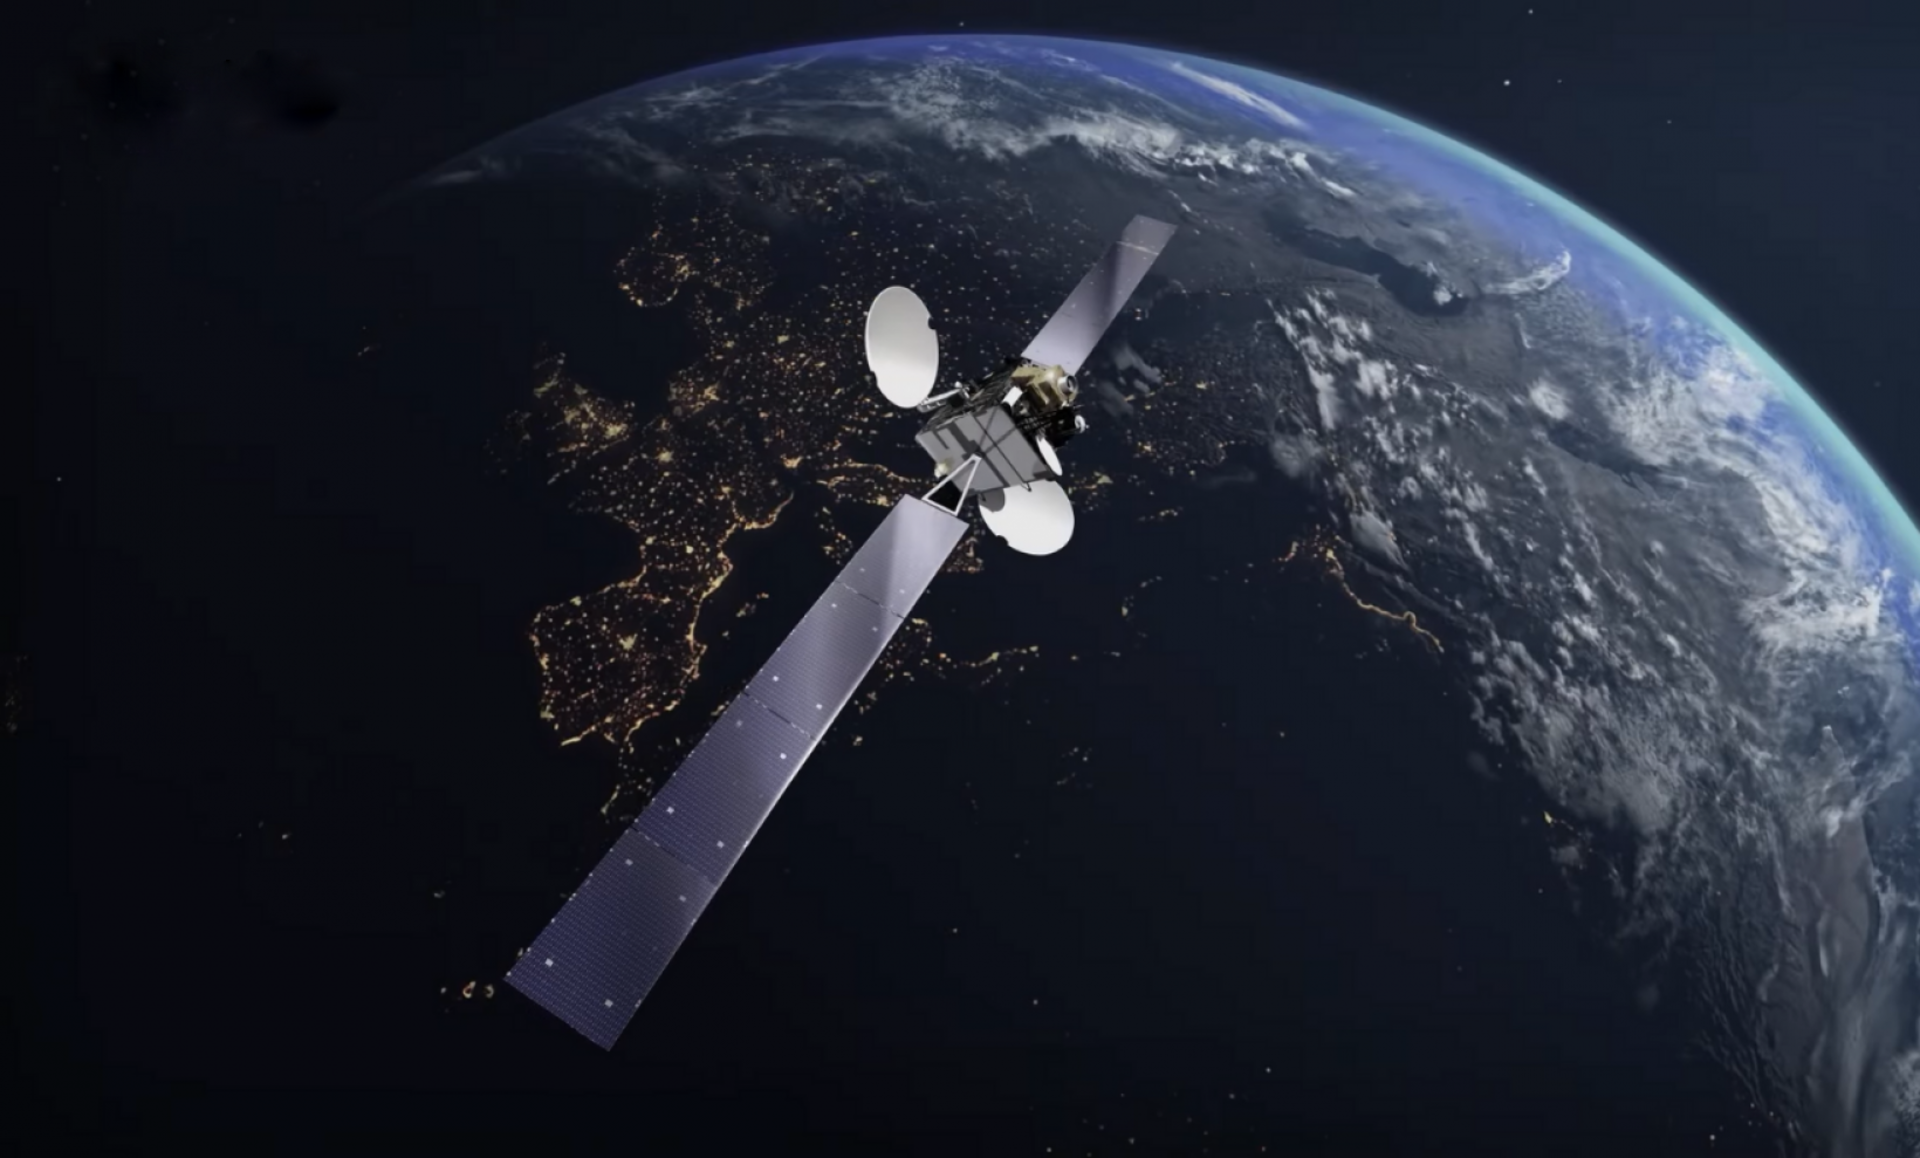 EGNOS signals are transmitted via geostationary satellites